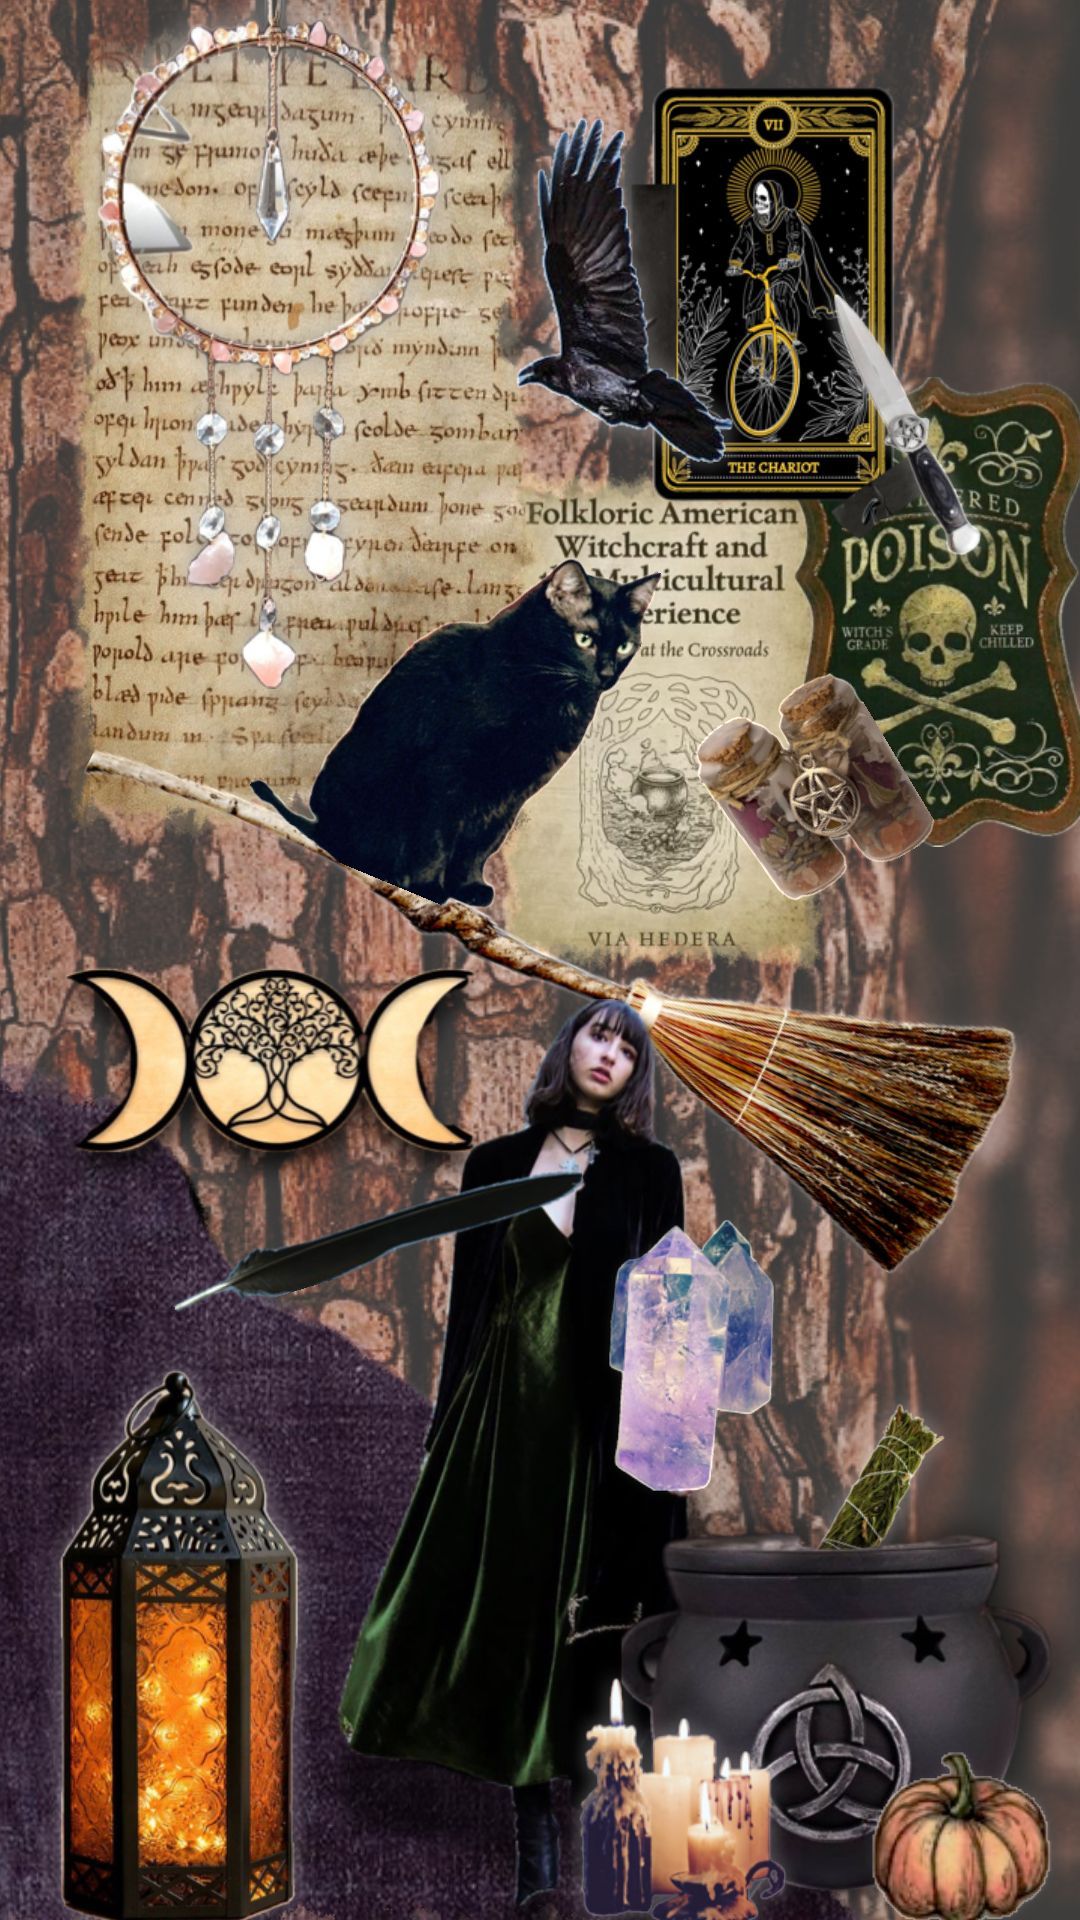 witch #witchy #witchcraft #witchaesthetic #witches #witchcore. W.i.t.c.h aesthetic, Witchcraft, Witch core